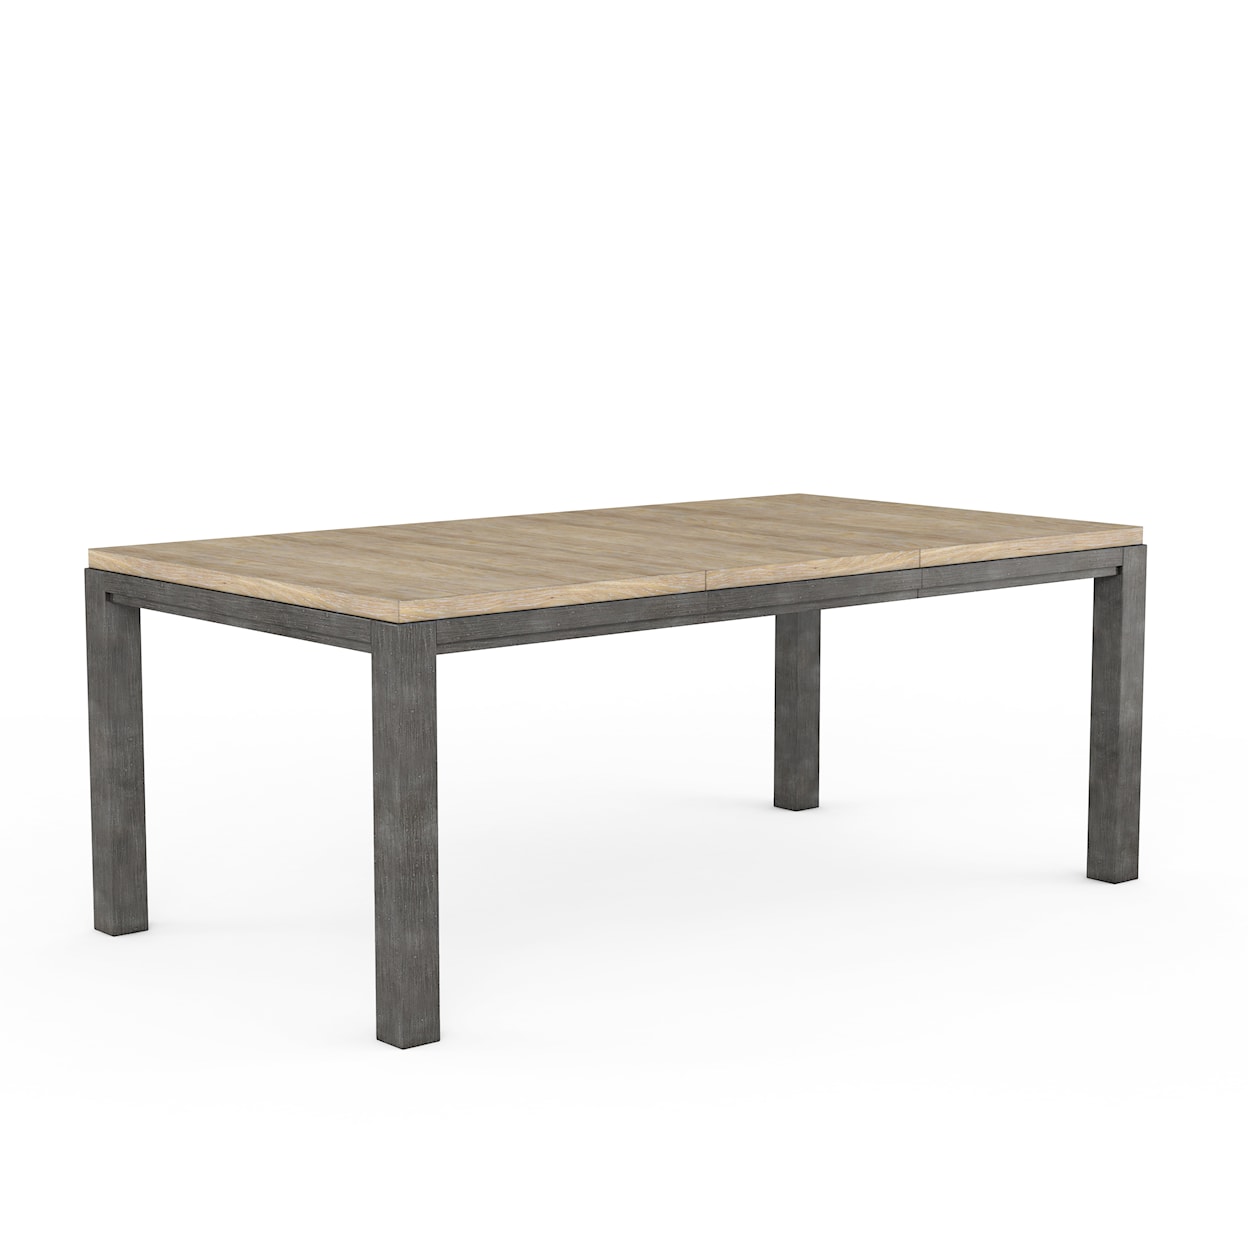 A.R.T. Furniture Inc Frame Rect. Dining Table